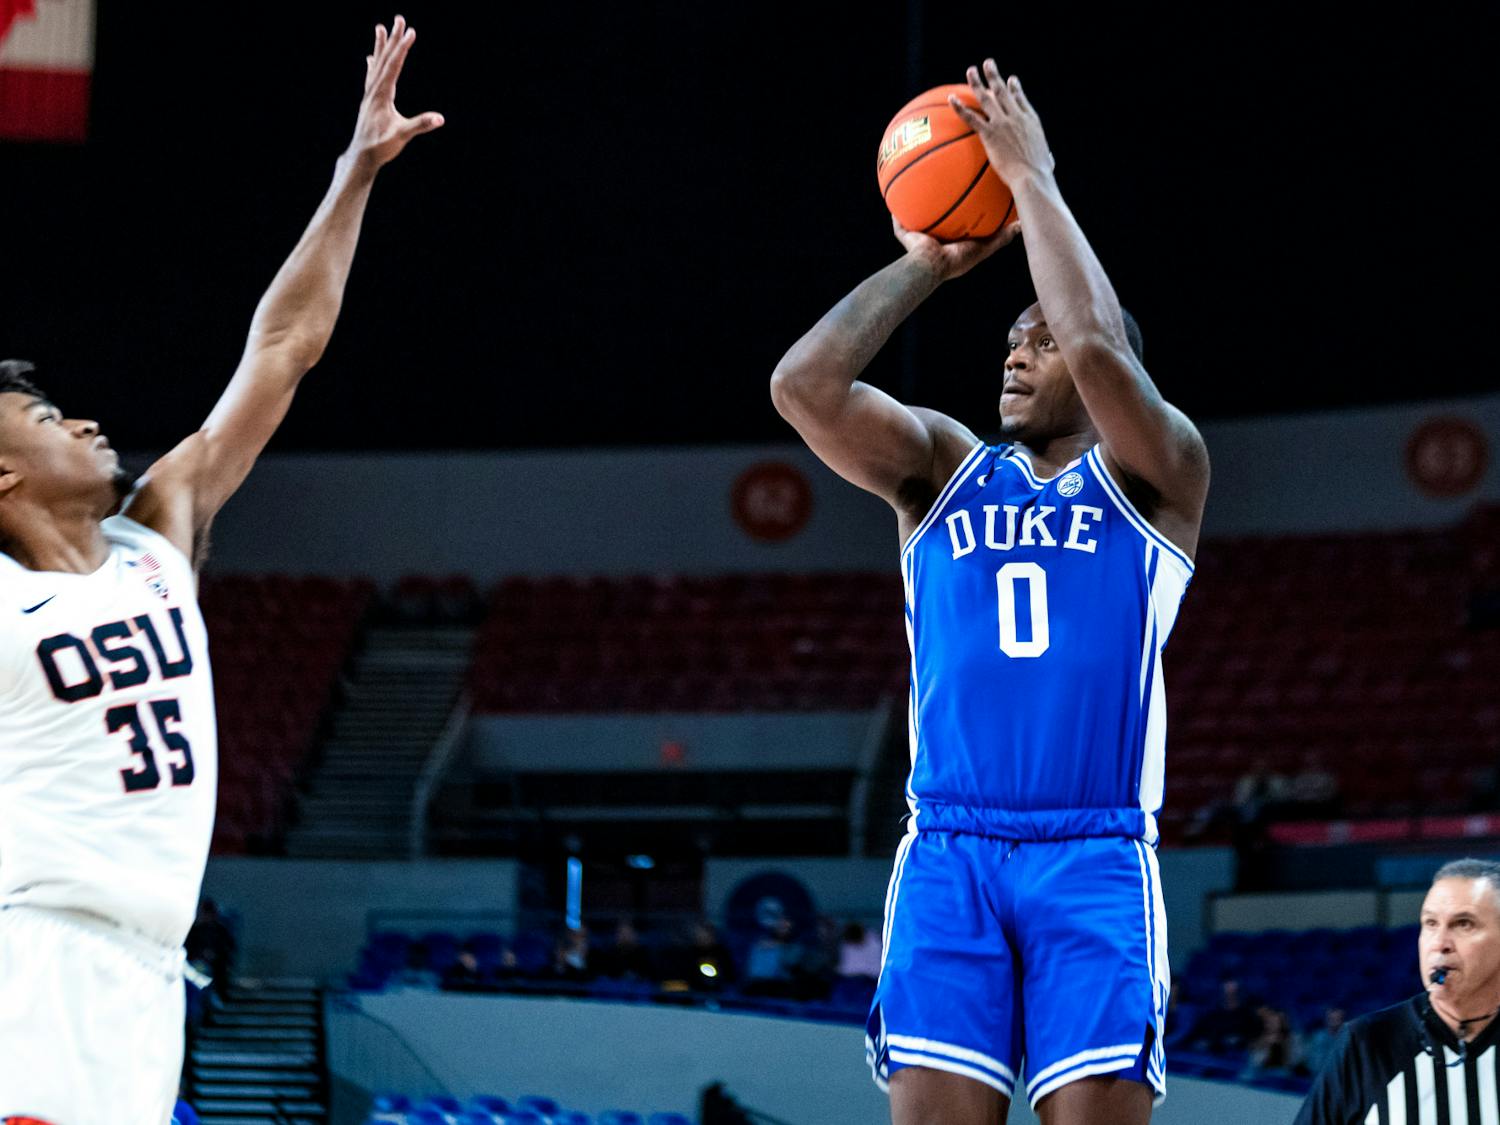 Dariq Whitehead was one of several freshmen to give Duke a boost in its 71-64 win against Xavier.